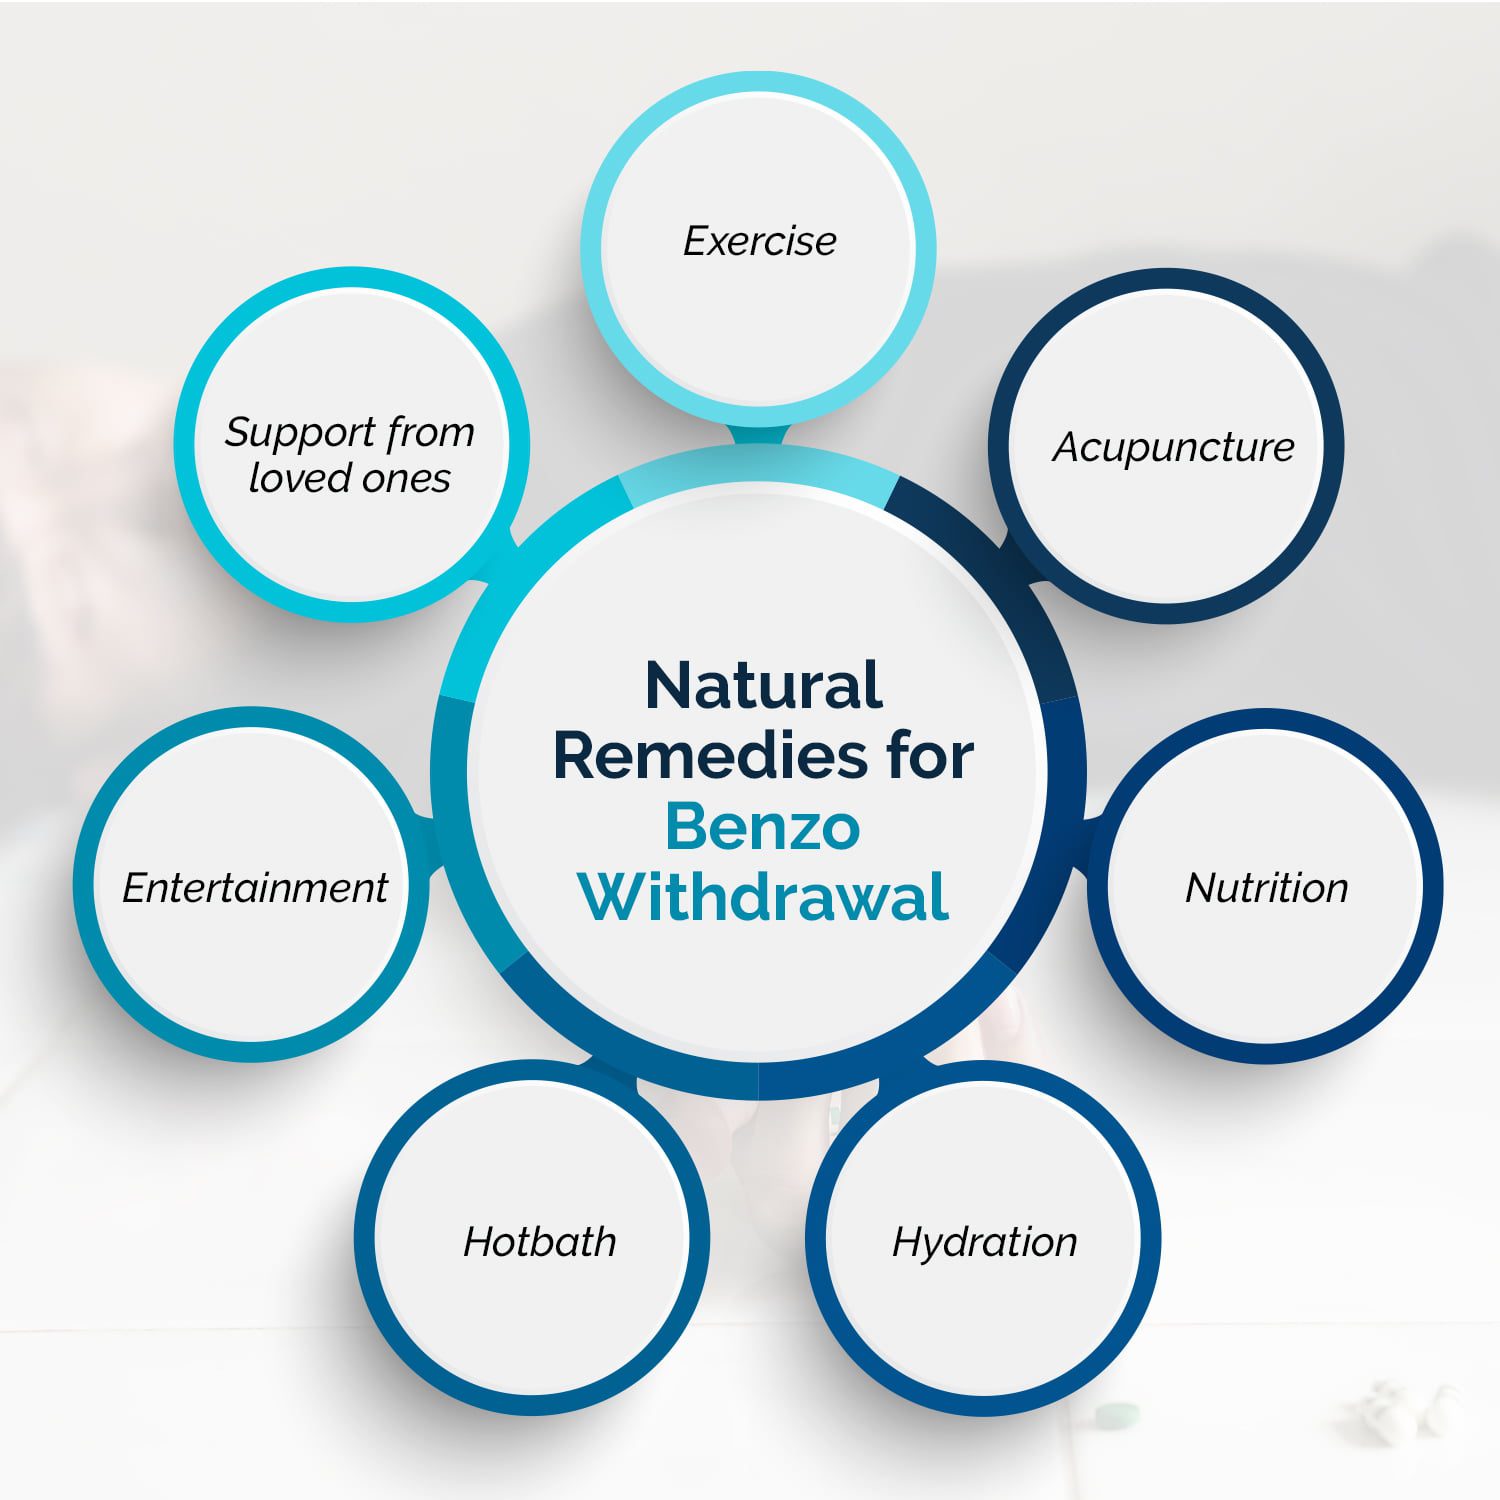  Benzodiazepines: Natural Remedies for Benzo Withdrawal